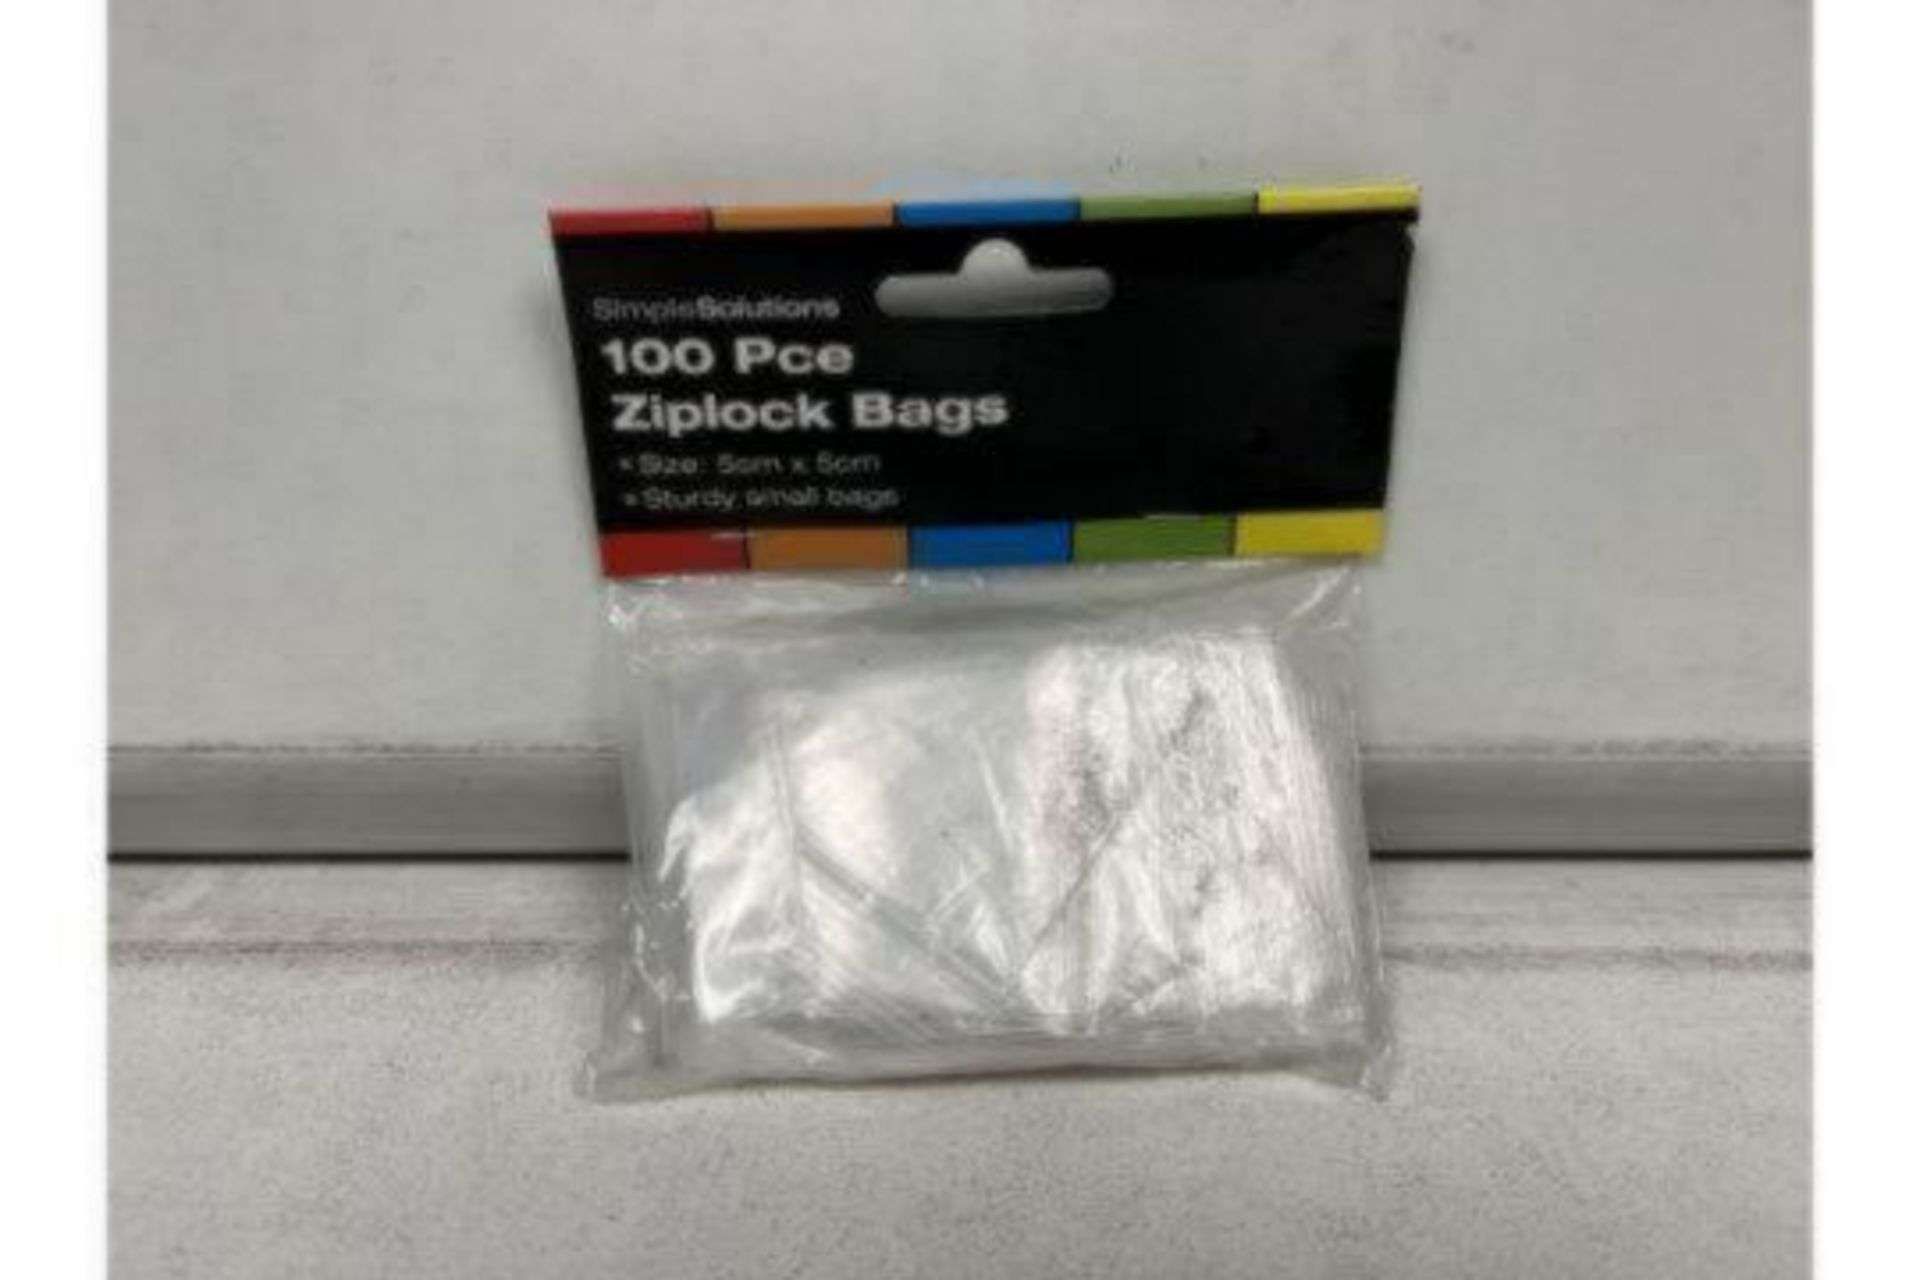 120 X NEW PACKAGED SIMPLE SOLUTIONS PACKS OF 100 ZIPLOCK BAGS. SIZE 5X5CM. STURDY DESIGN. (